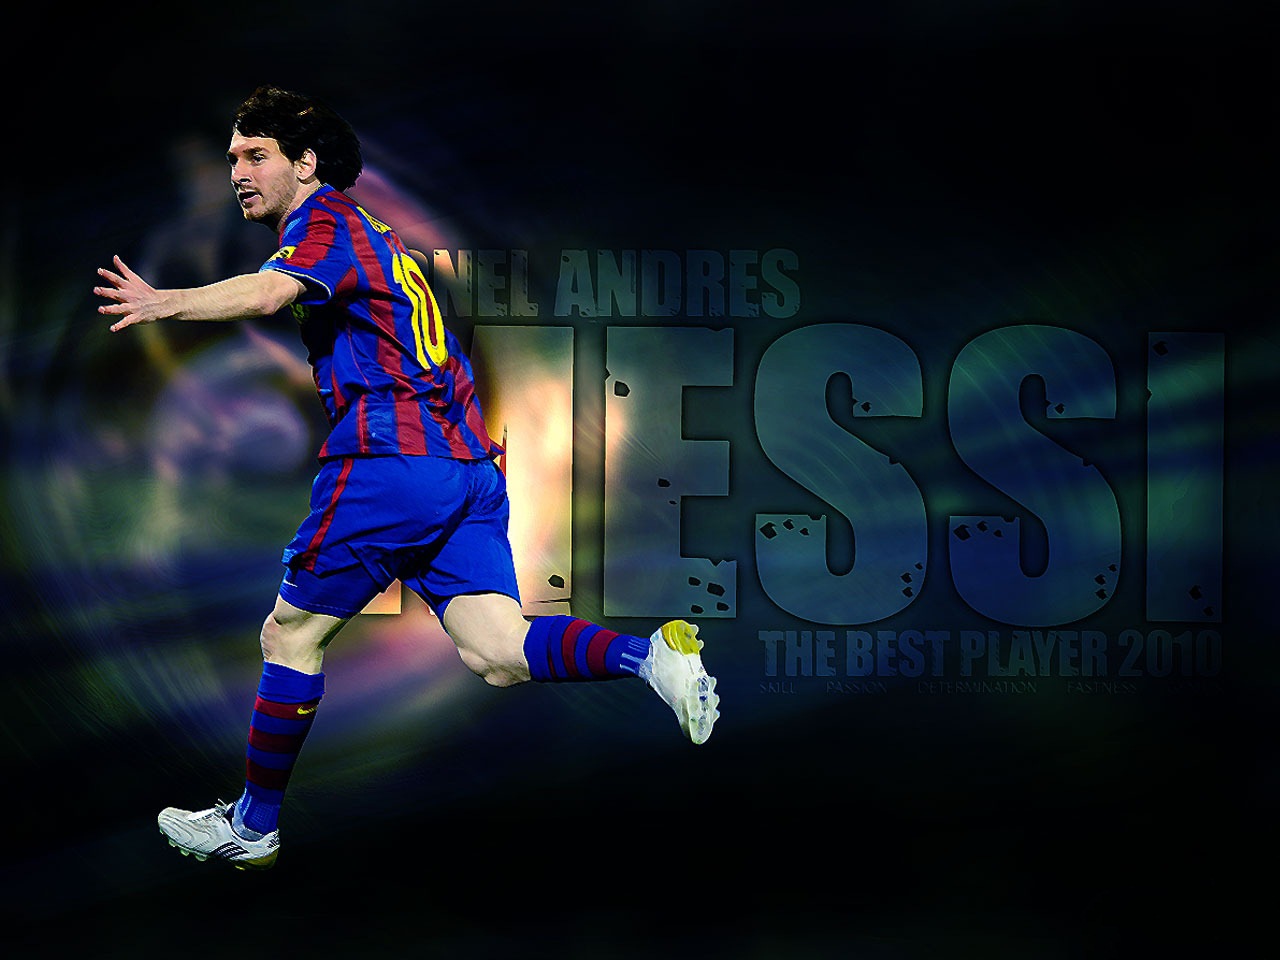 All Wallpapers Lionel Messi hd New Nice Wallpapers 2013 1280x960